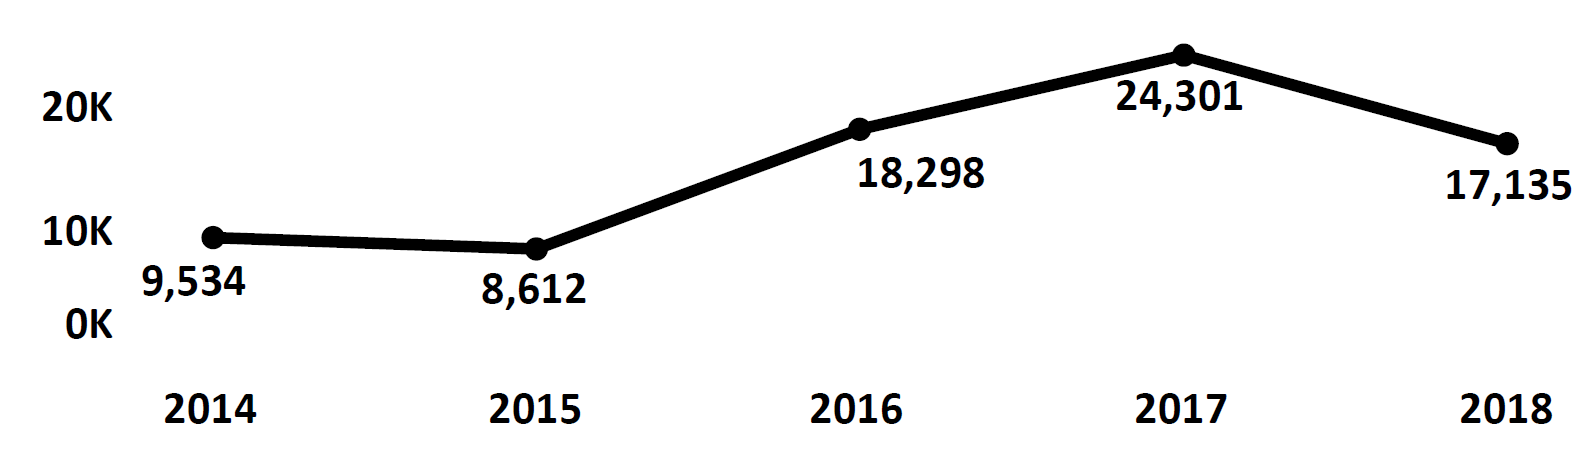 Graph of Do Not Call complaints recorded in the District of Columbia from fiscal year 2014 to fiscal year 2018. In 2014 there were 9,534 complaints filed. This dipped in 2015, then increased substanially each year, peaking at 24,301 in 2017. In 2018 there were 17,135 complaints filed, fewer than 2017 and 2016.